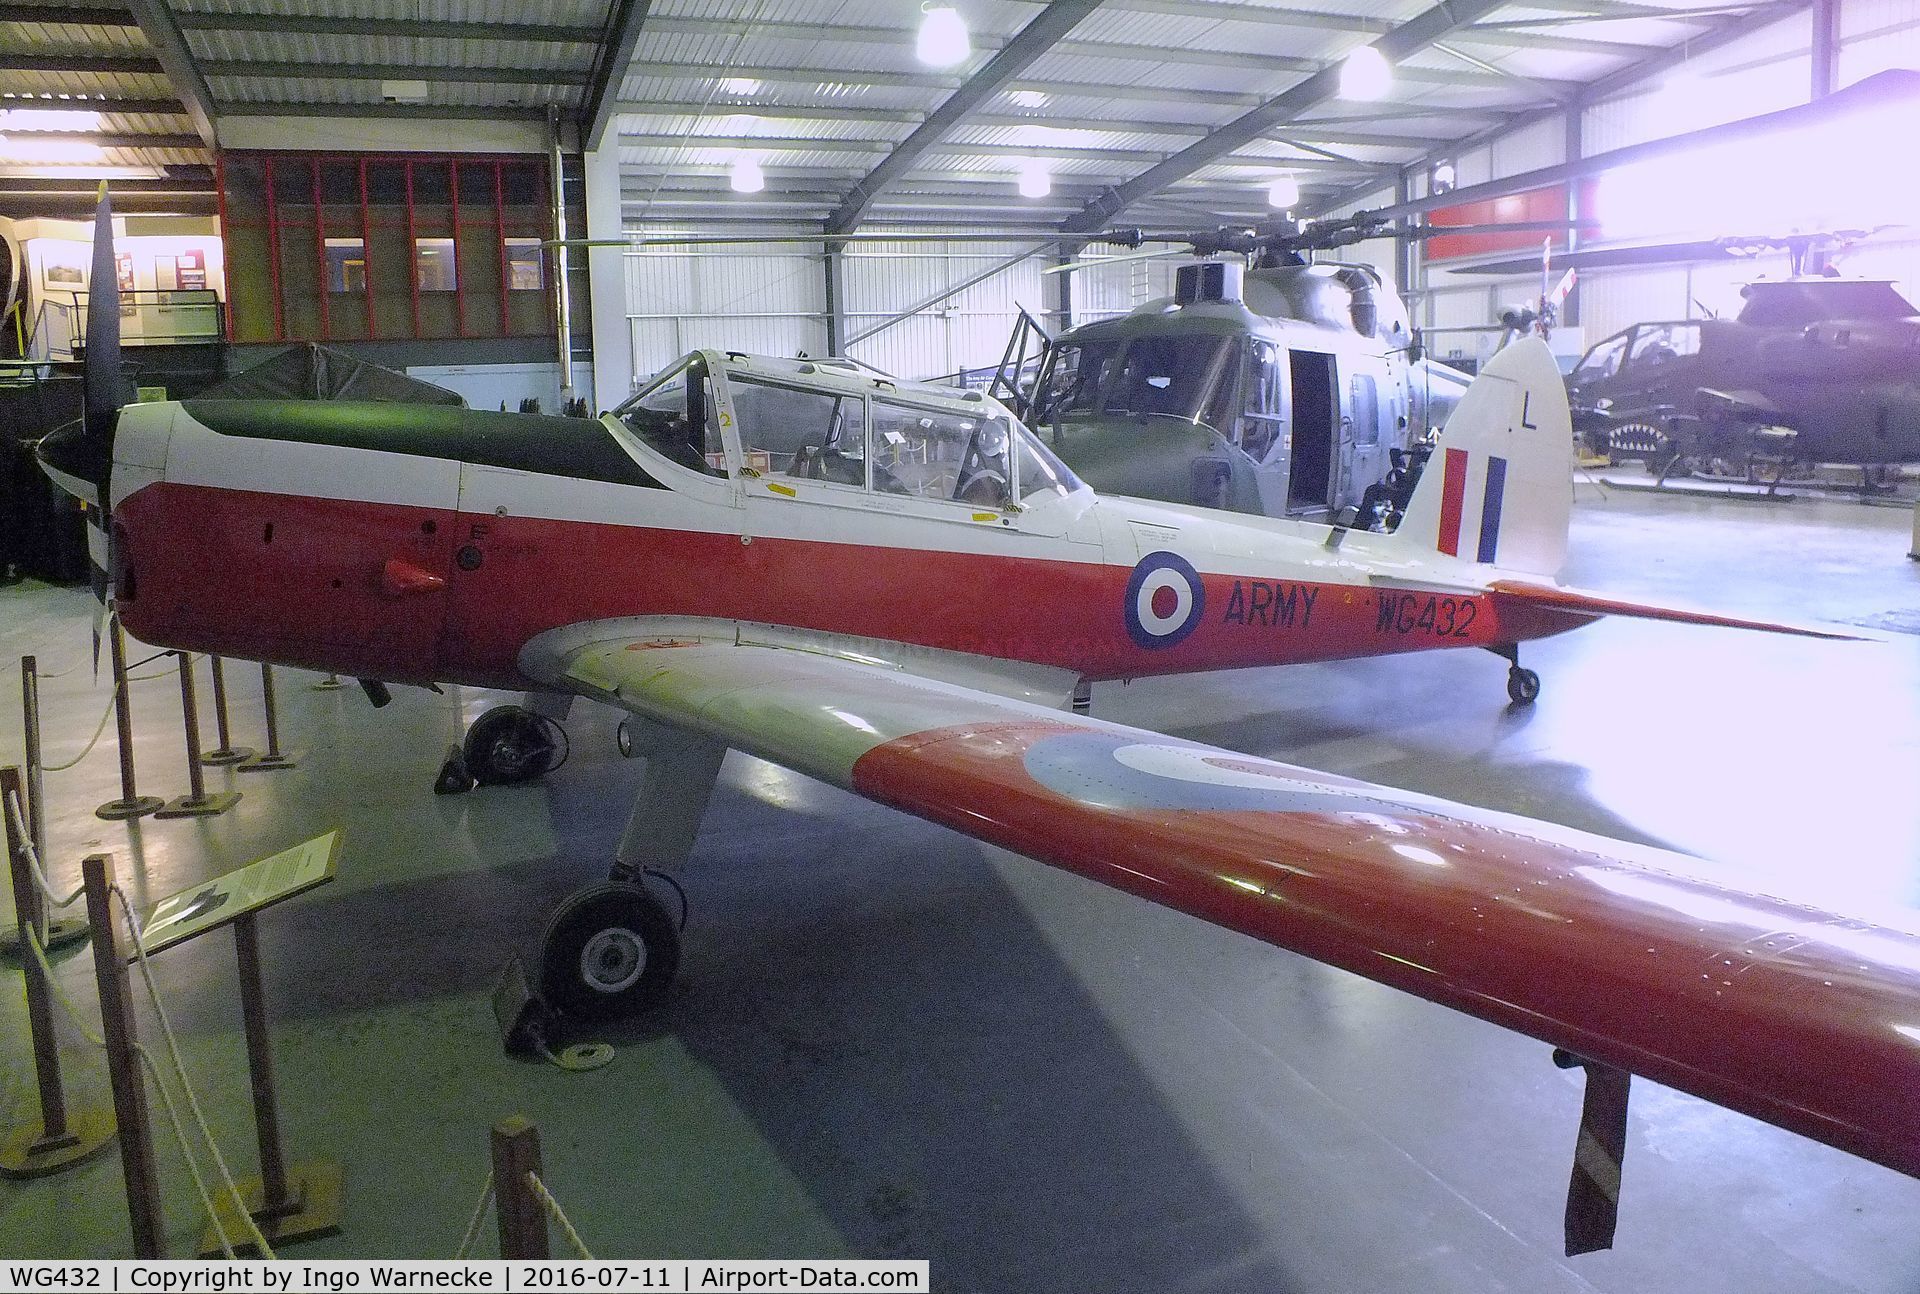 WG432, 1951 De Havilland DHC-1 Chipmunk T.10 C/N C1/0506, De Havilland Canada DHC-1 Chipmunk T10 at the Museum of Army Flying, Middle Wallop